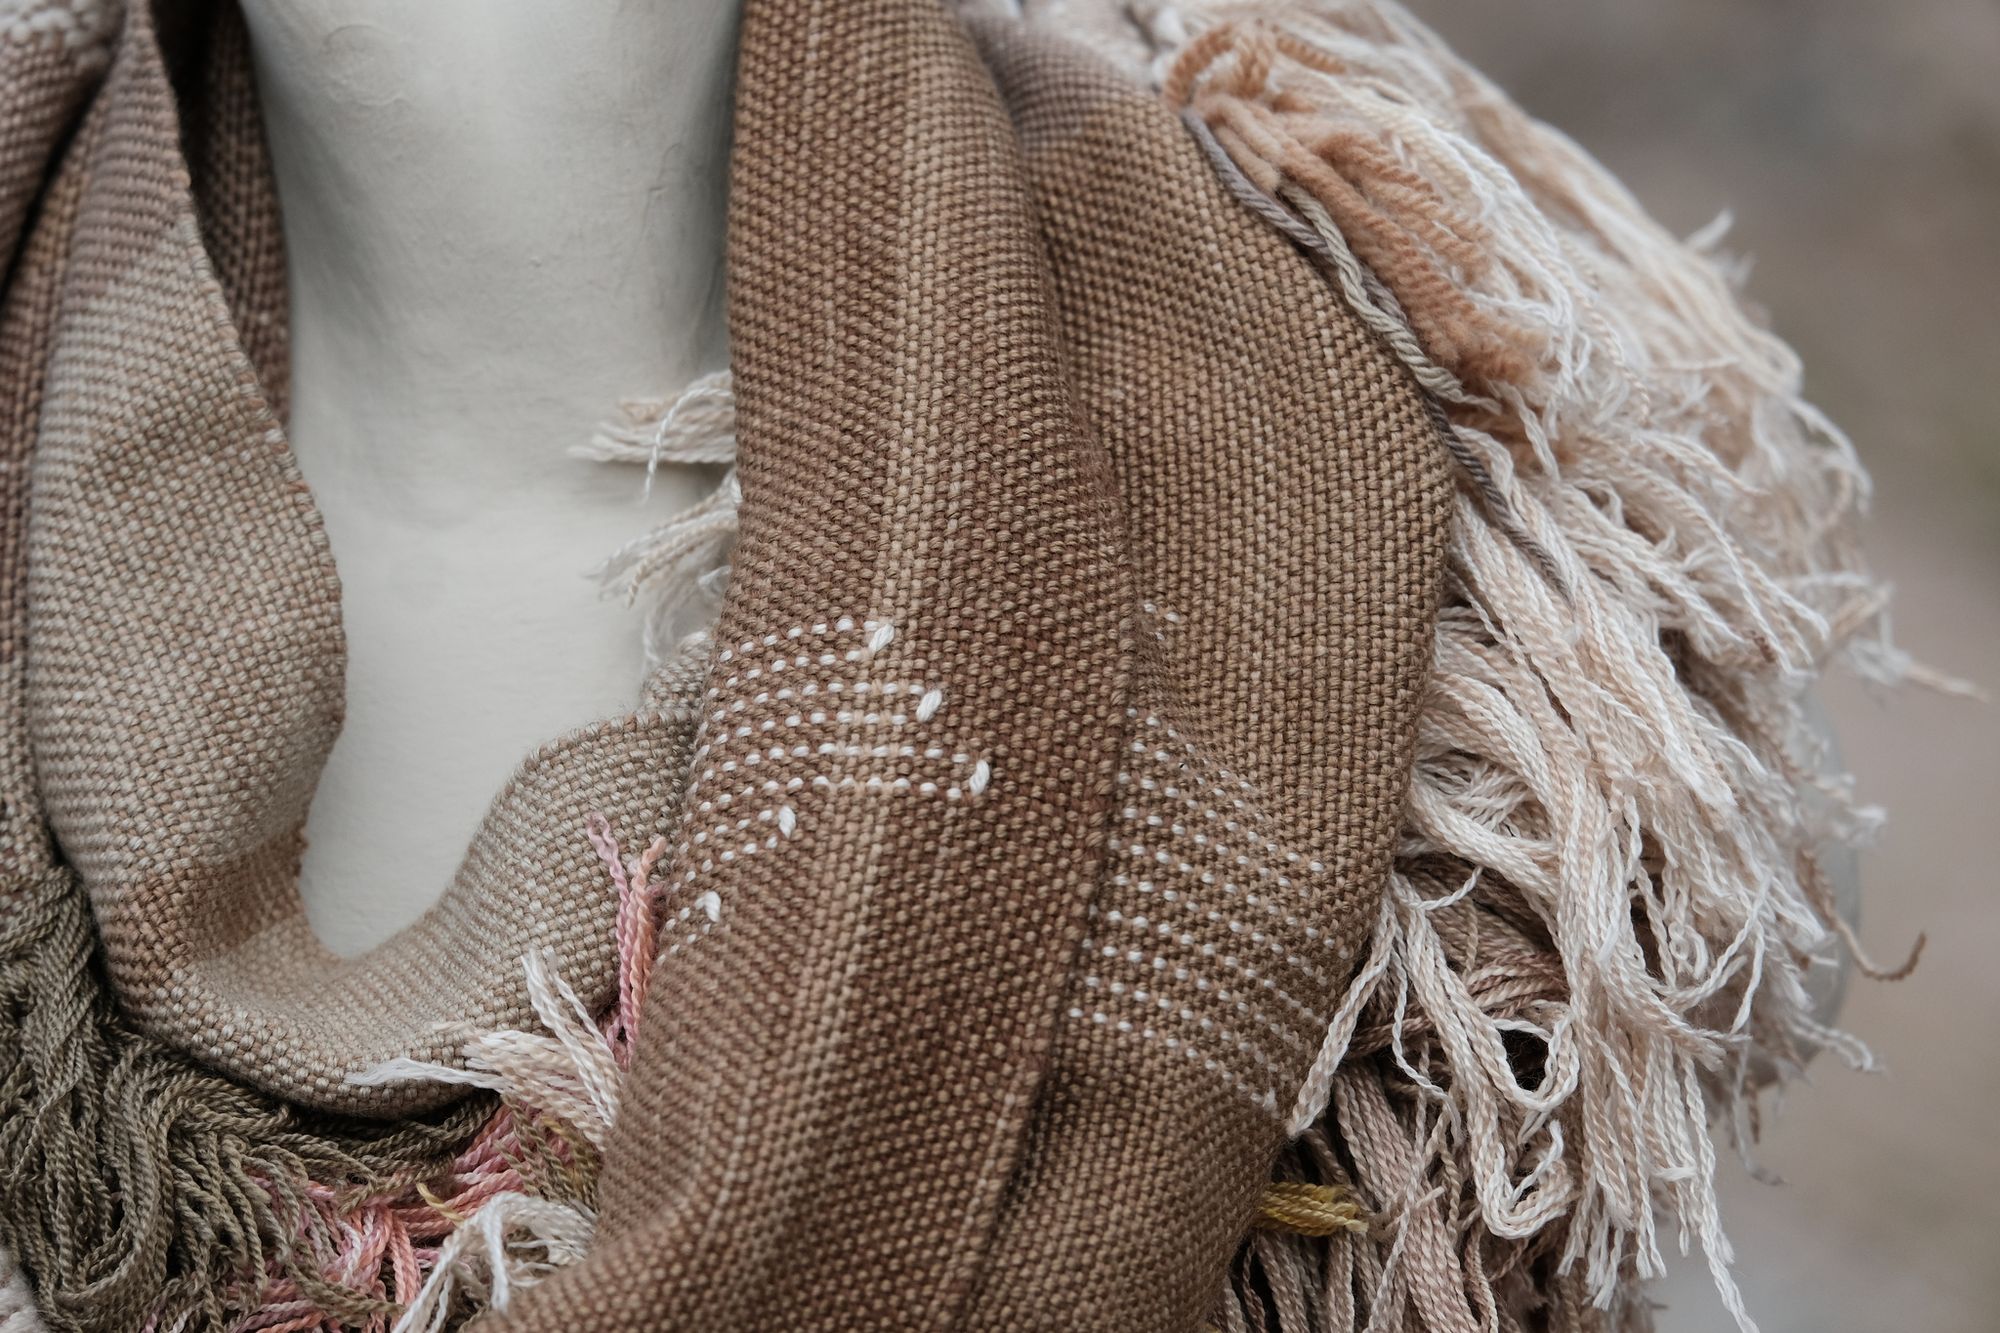 detail of Handwoven naturally dyed brown, grey, yellow, pink and green scarf with sumptuous sculptural fringe on a white mannequin on a rock in the desert